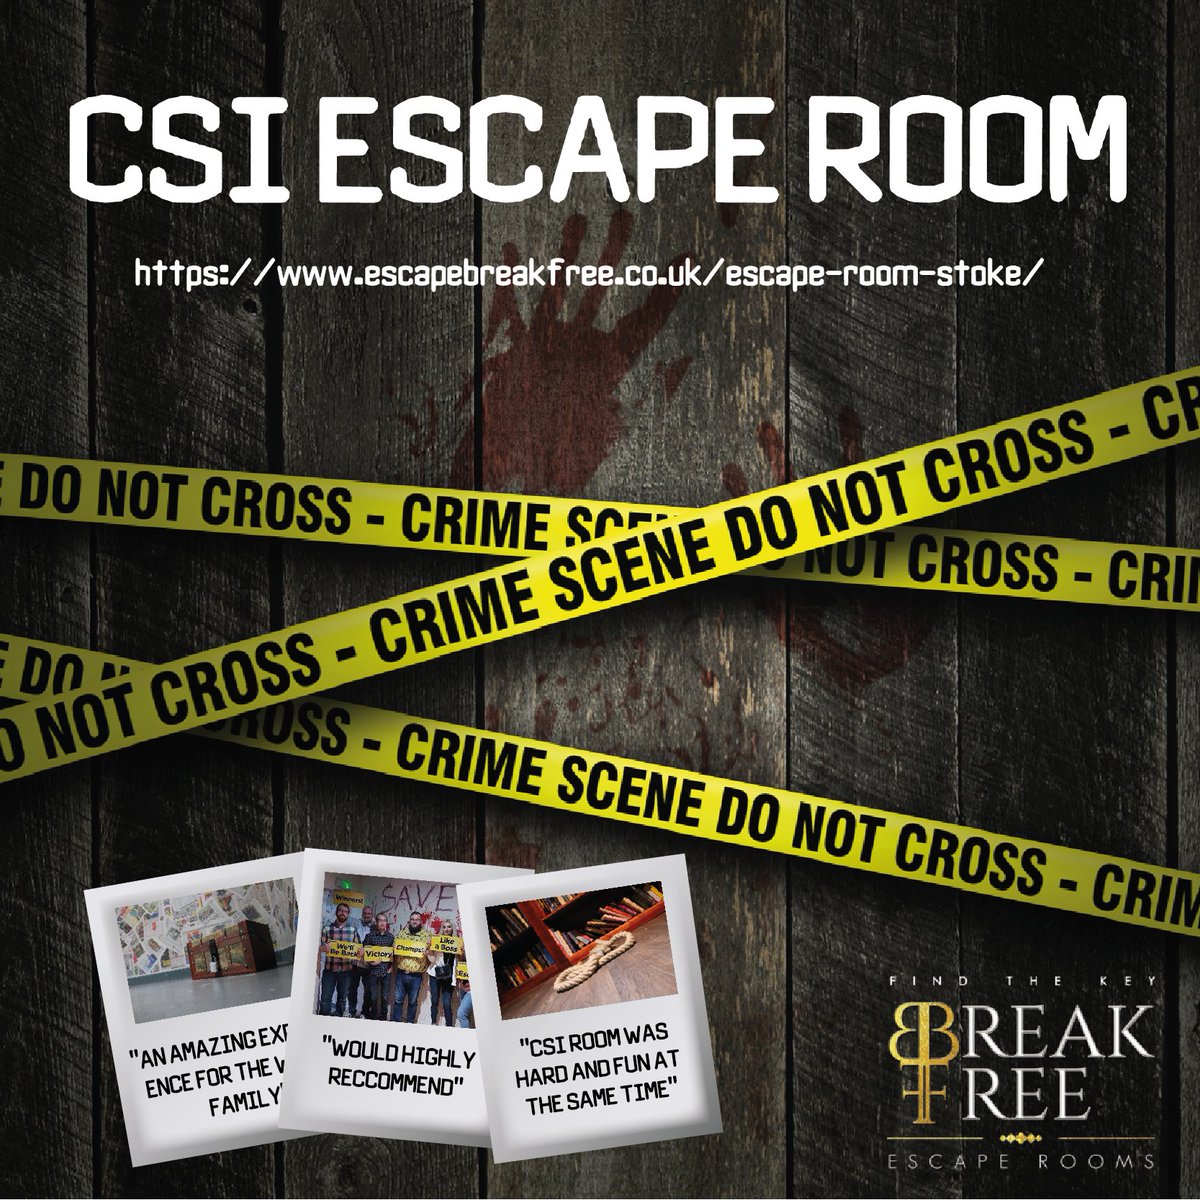 May 17th 📍 We can't wait to welcome you all back 😁 All rooms are open to book in advance, see more details on our website 👇 escapebreakfree.co.uk/escape-room-st… #escaperoom #islandofincarceration #stokeontrent #reopening #reopeningsoon #CSI #Jumanji #prisonbreak #sherlockholmes